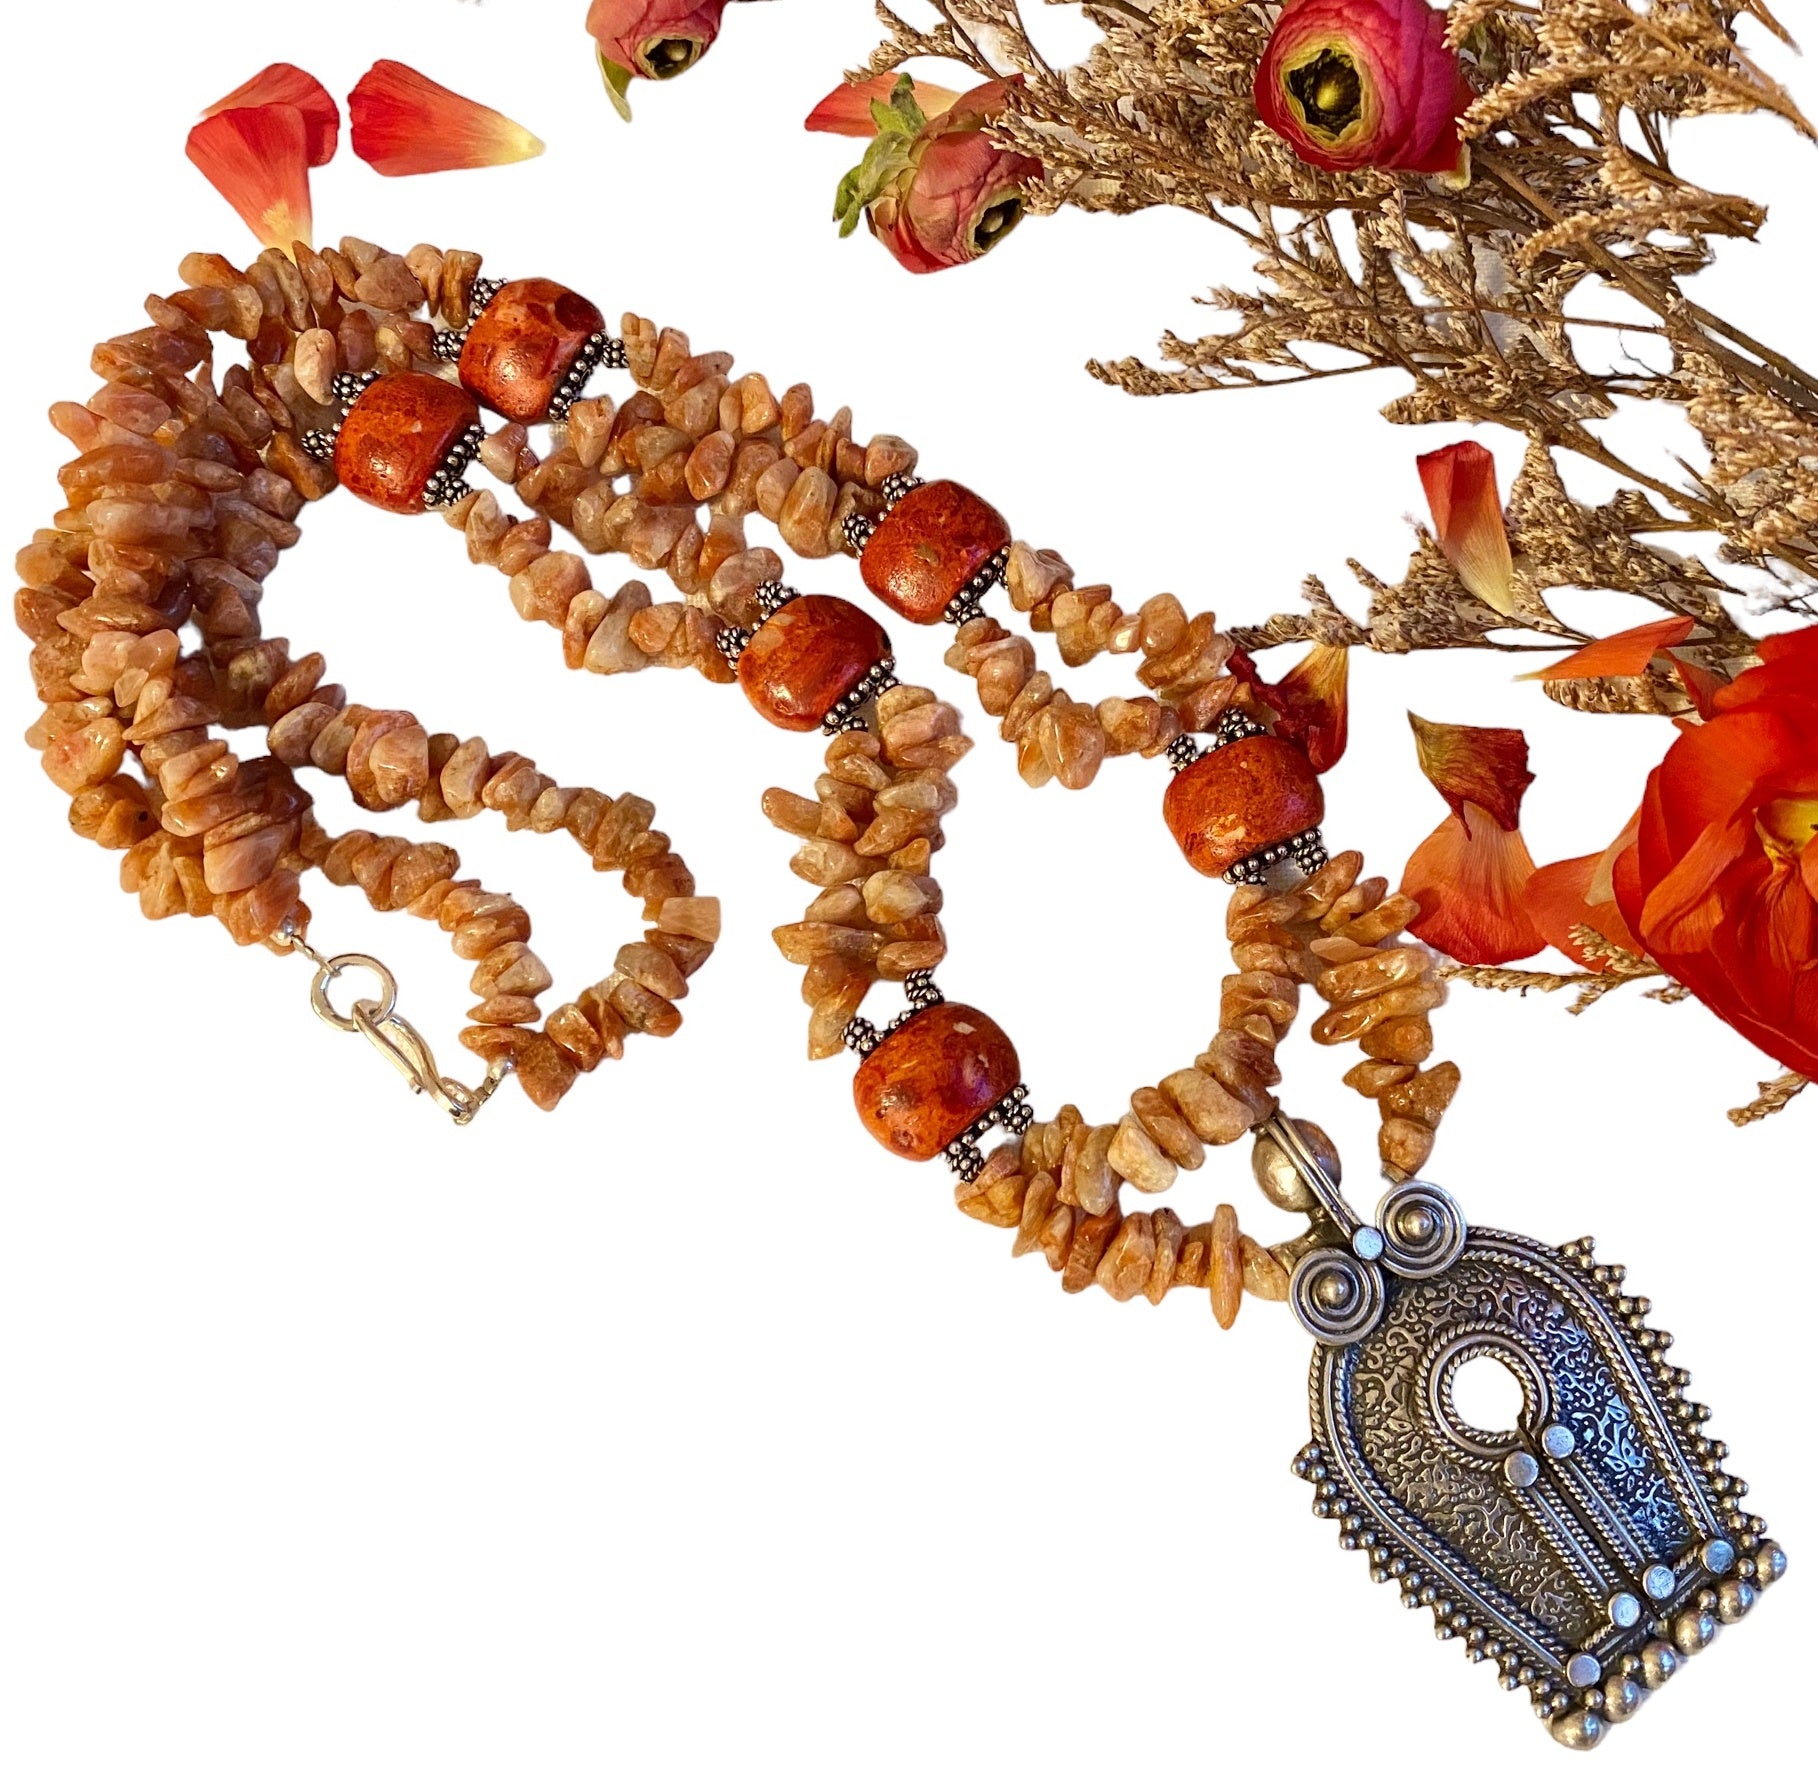 ON SALE - NEW Sunstone & Coral necklace